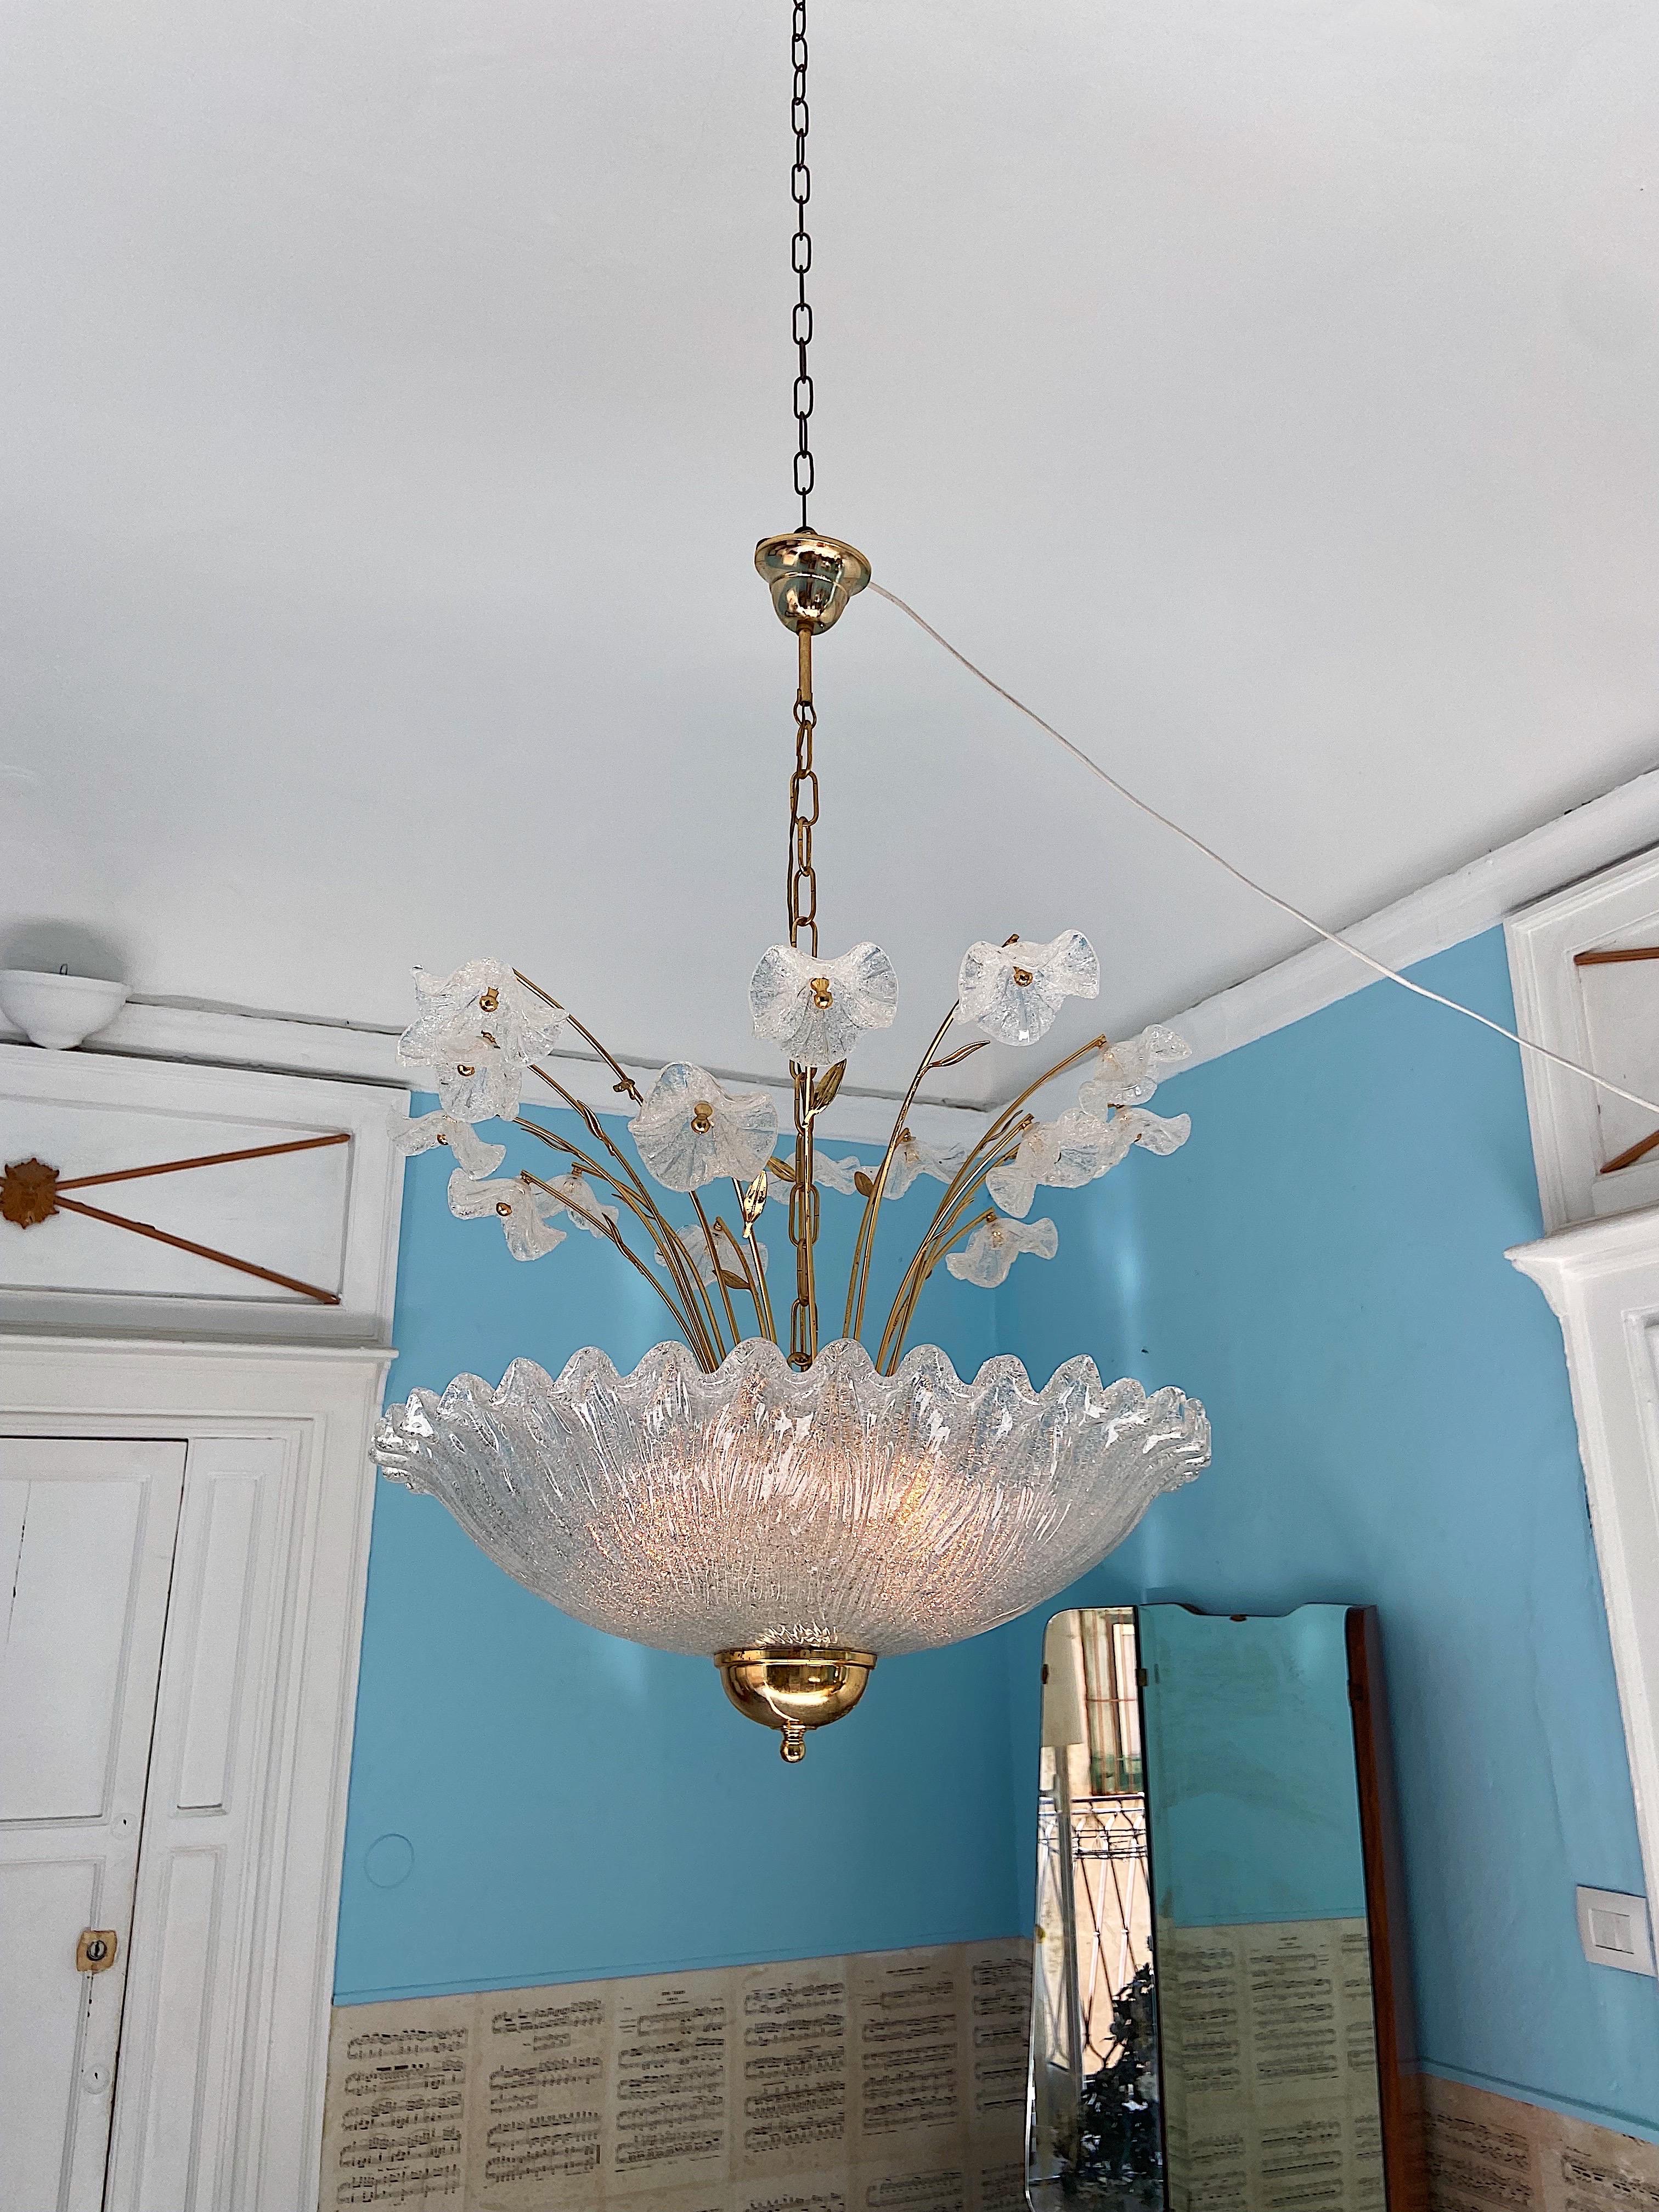 Beautiful chandelier in Murano glass, 1980. The light has 5 light bulbs. 

Details
Dimensions: Height without chain 50  cm, Height with chain 85 cm Diameter: 60  cm 
Materials and Techniques: Metal, Glass
Place of Origin: Murano, Italy
Period: